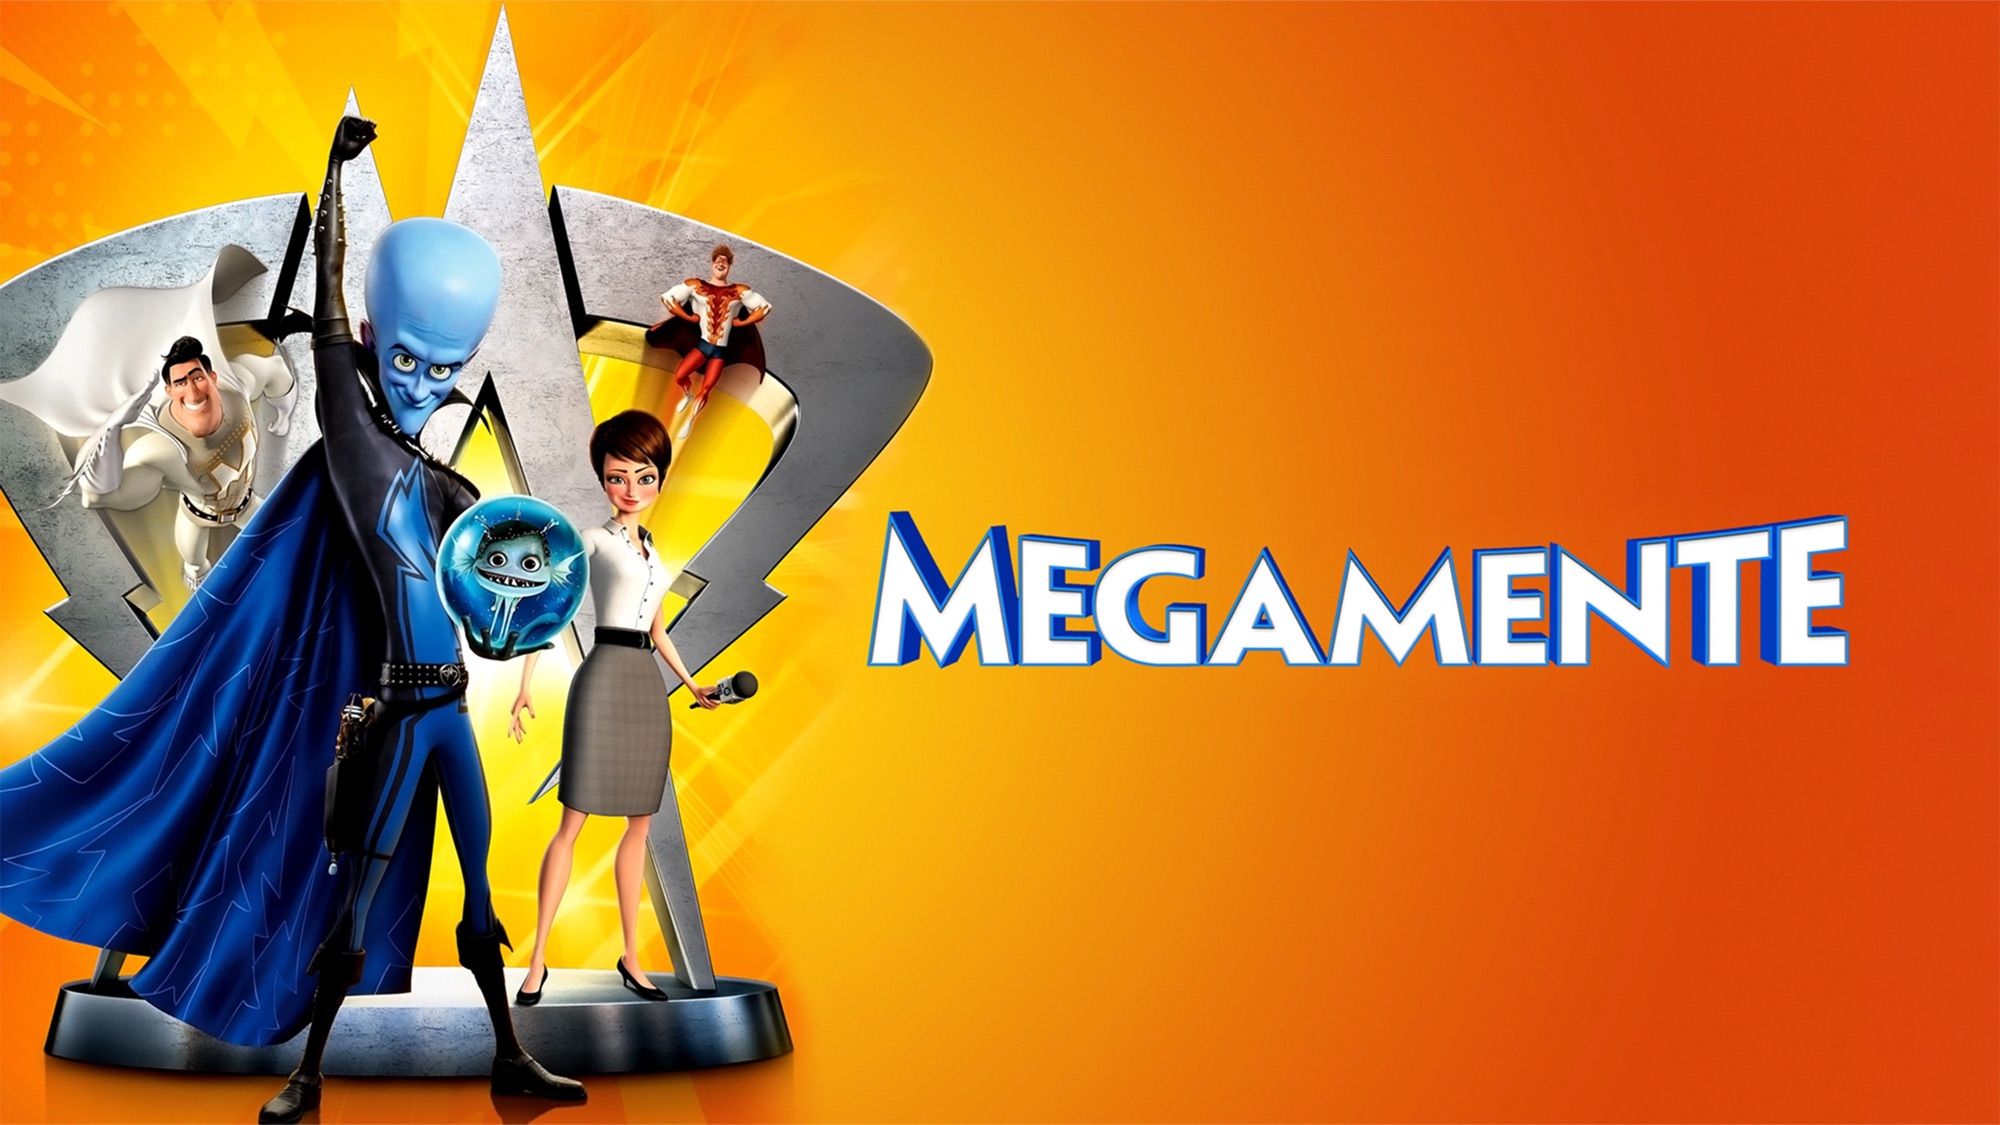 Wallpaper  illustration cartoon Toy animated movies machine Megamind  figurine 2560x1440 px action figure 2560x1440  wallpaperUp  629204  HD  Wallpapers  WallHere